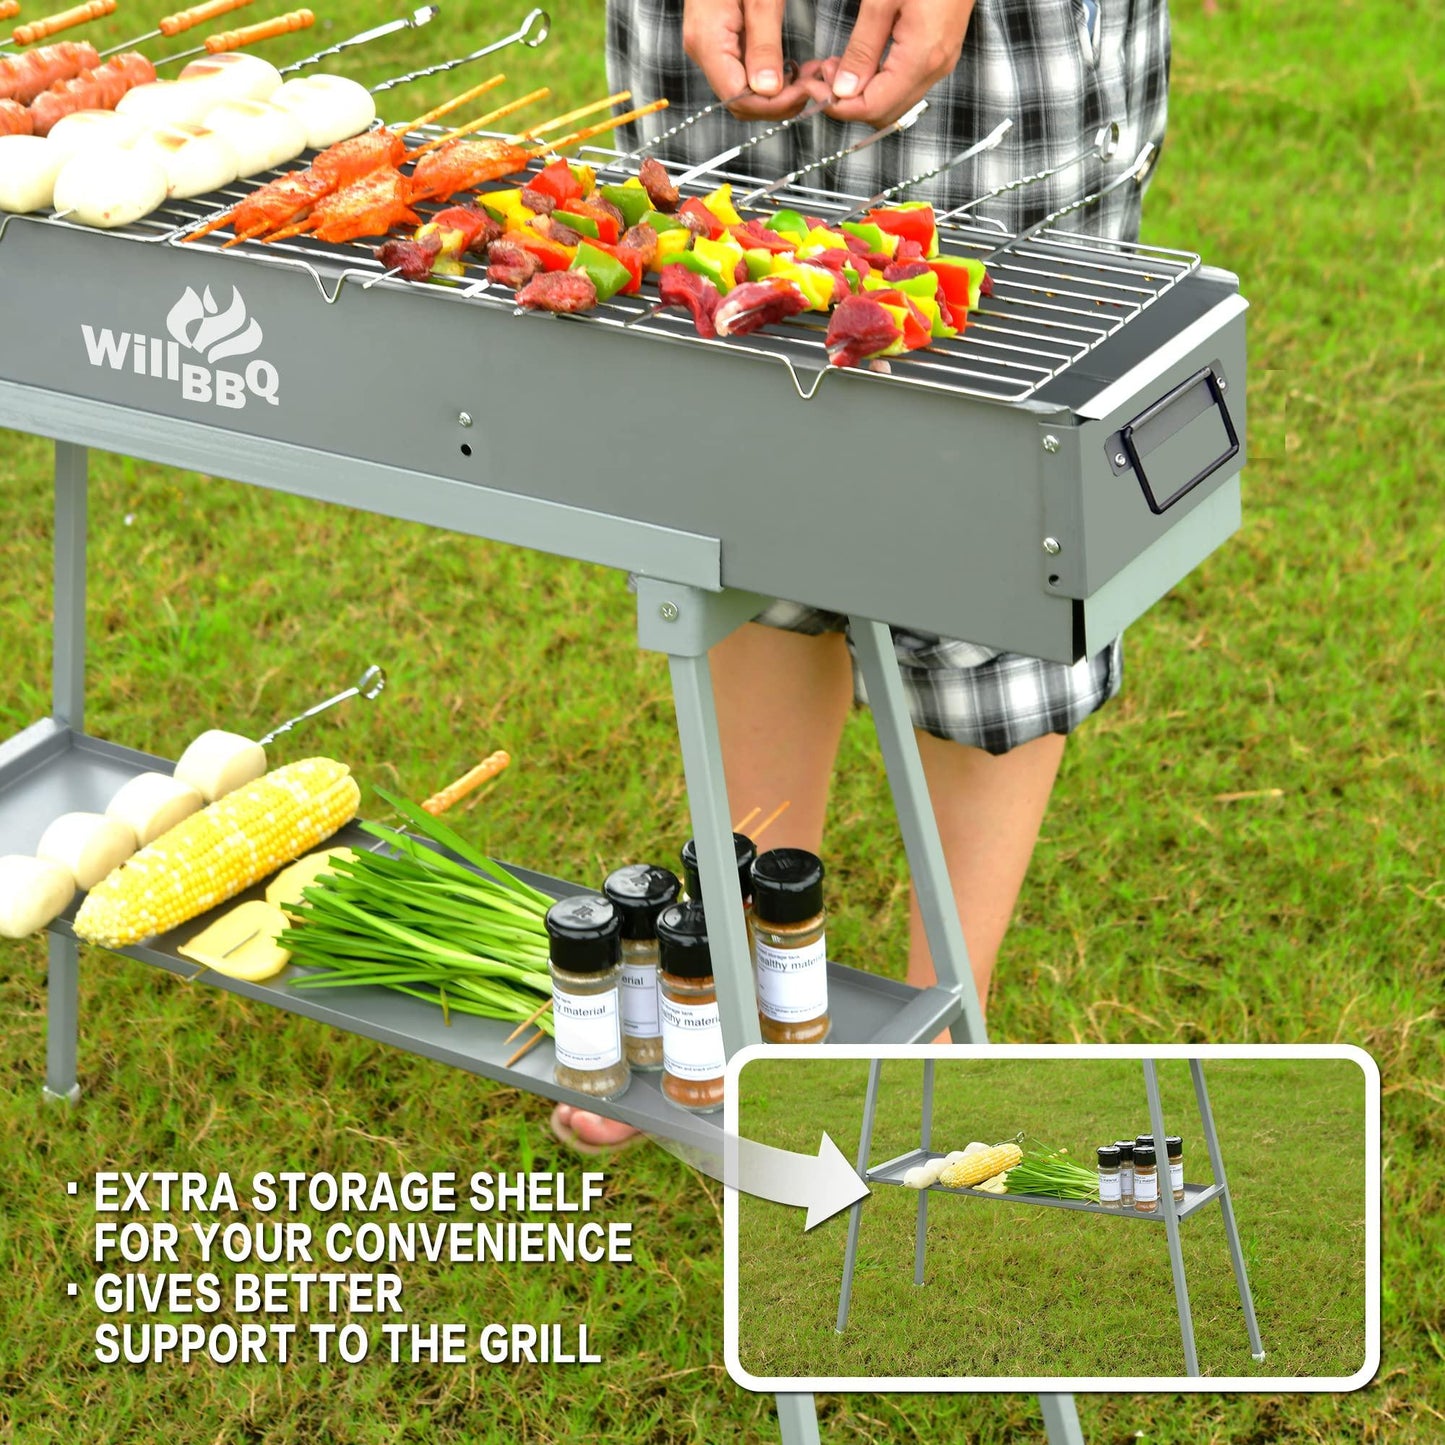 WILLBBQ Commercial Quality Portable Charcoal Grills Multiple Size Hibachi BBQ Lamb Skewer Folded Camping Barbecue Grill for Garden Backyard Party Picnic Travel Outdoor Cooking Use(31.6x7.1x5.1 inch) - CookCave